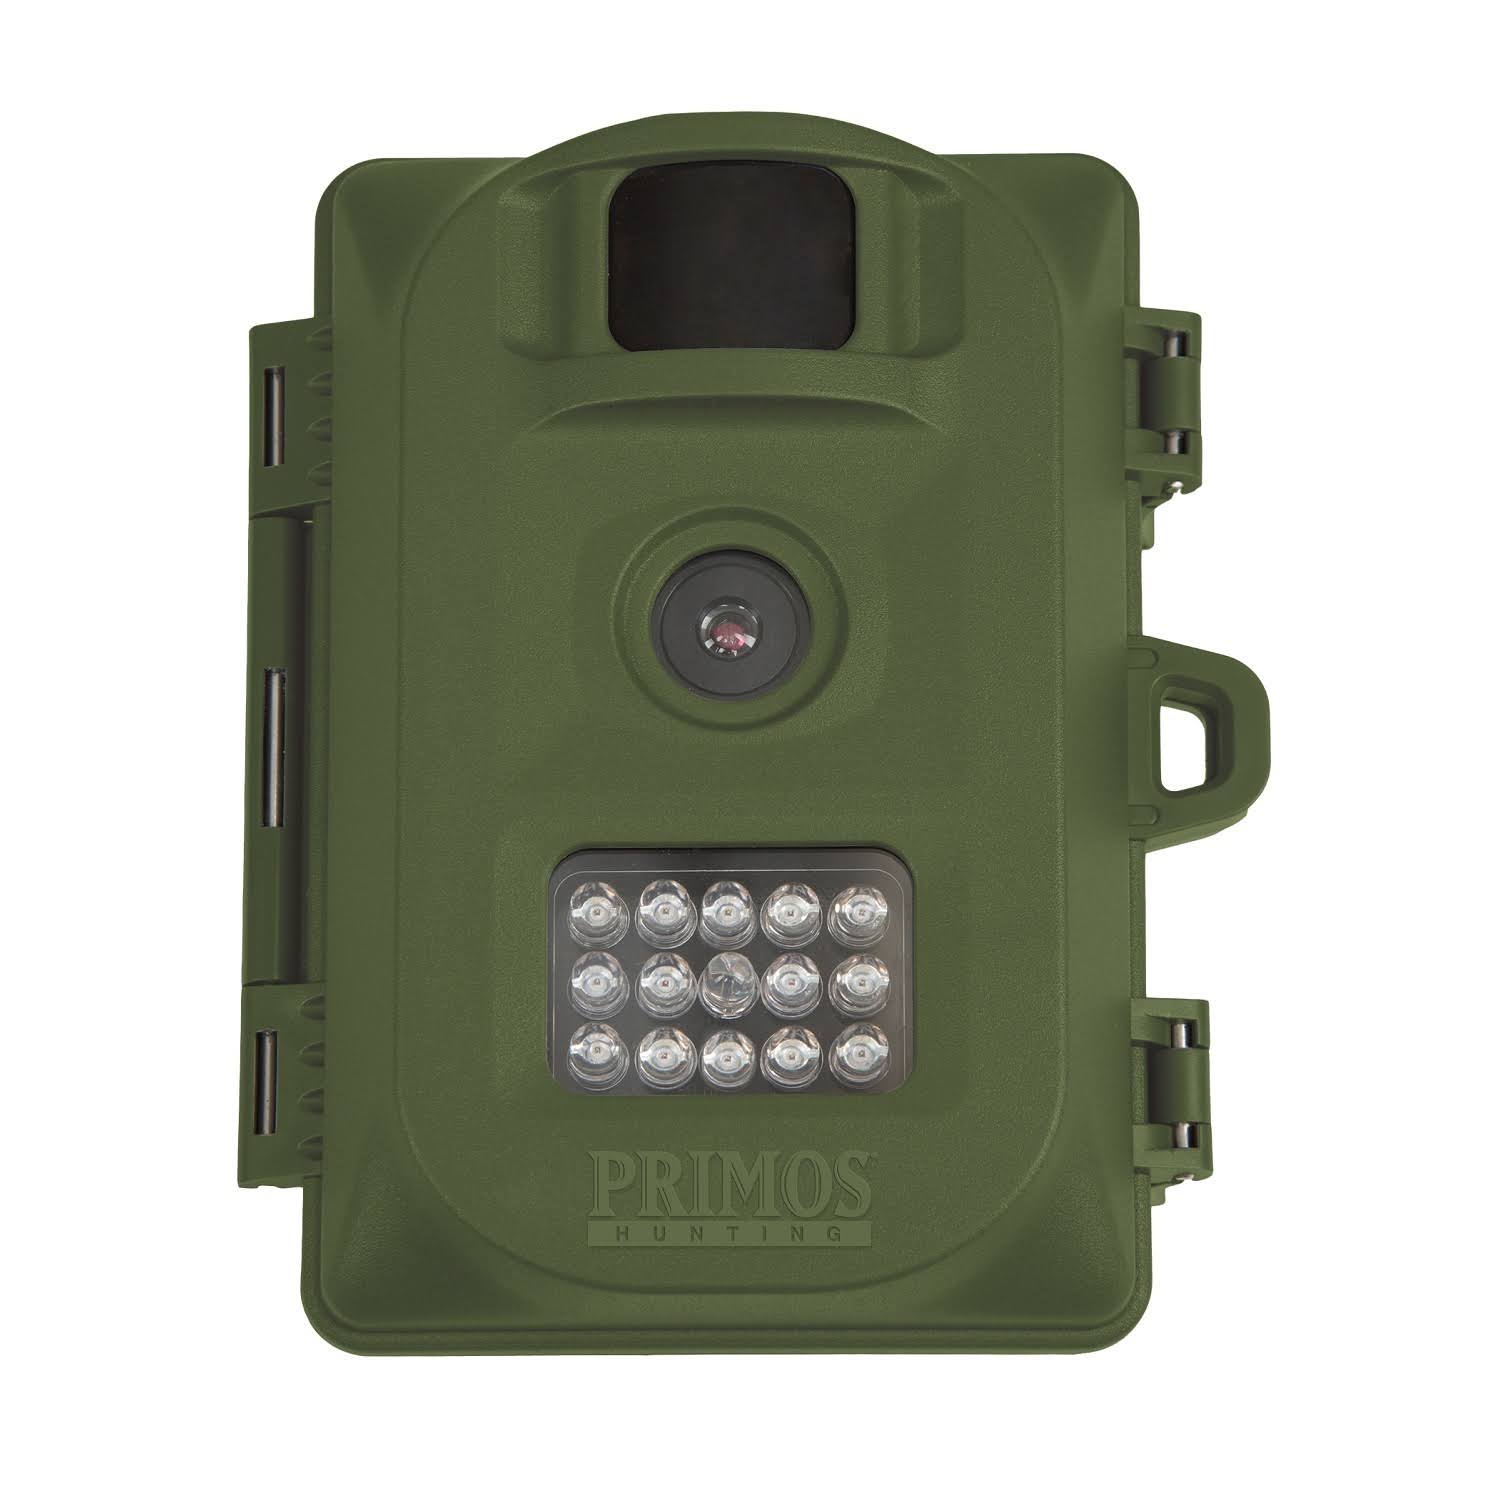 Bushnell Primos 6MP Bullet Proof Trail Camera with Low Glow LED, Green